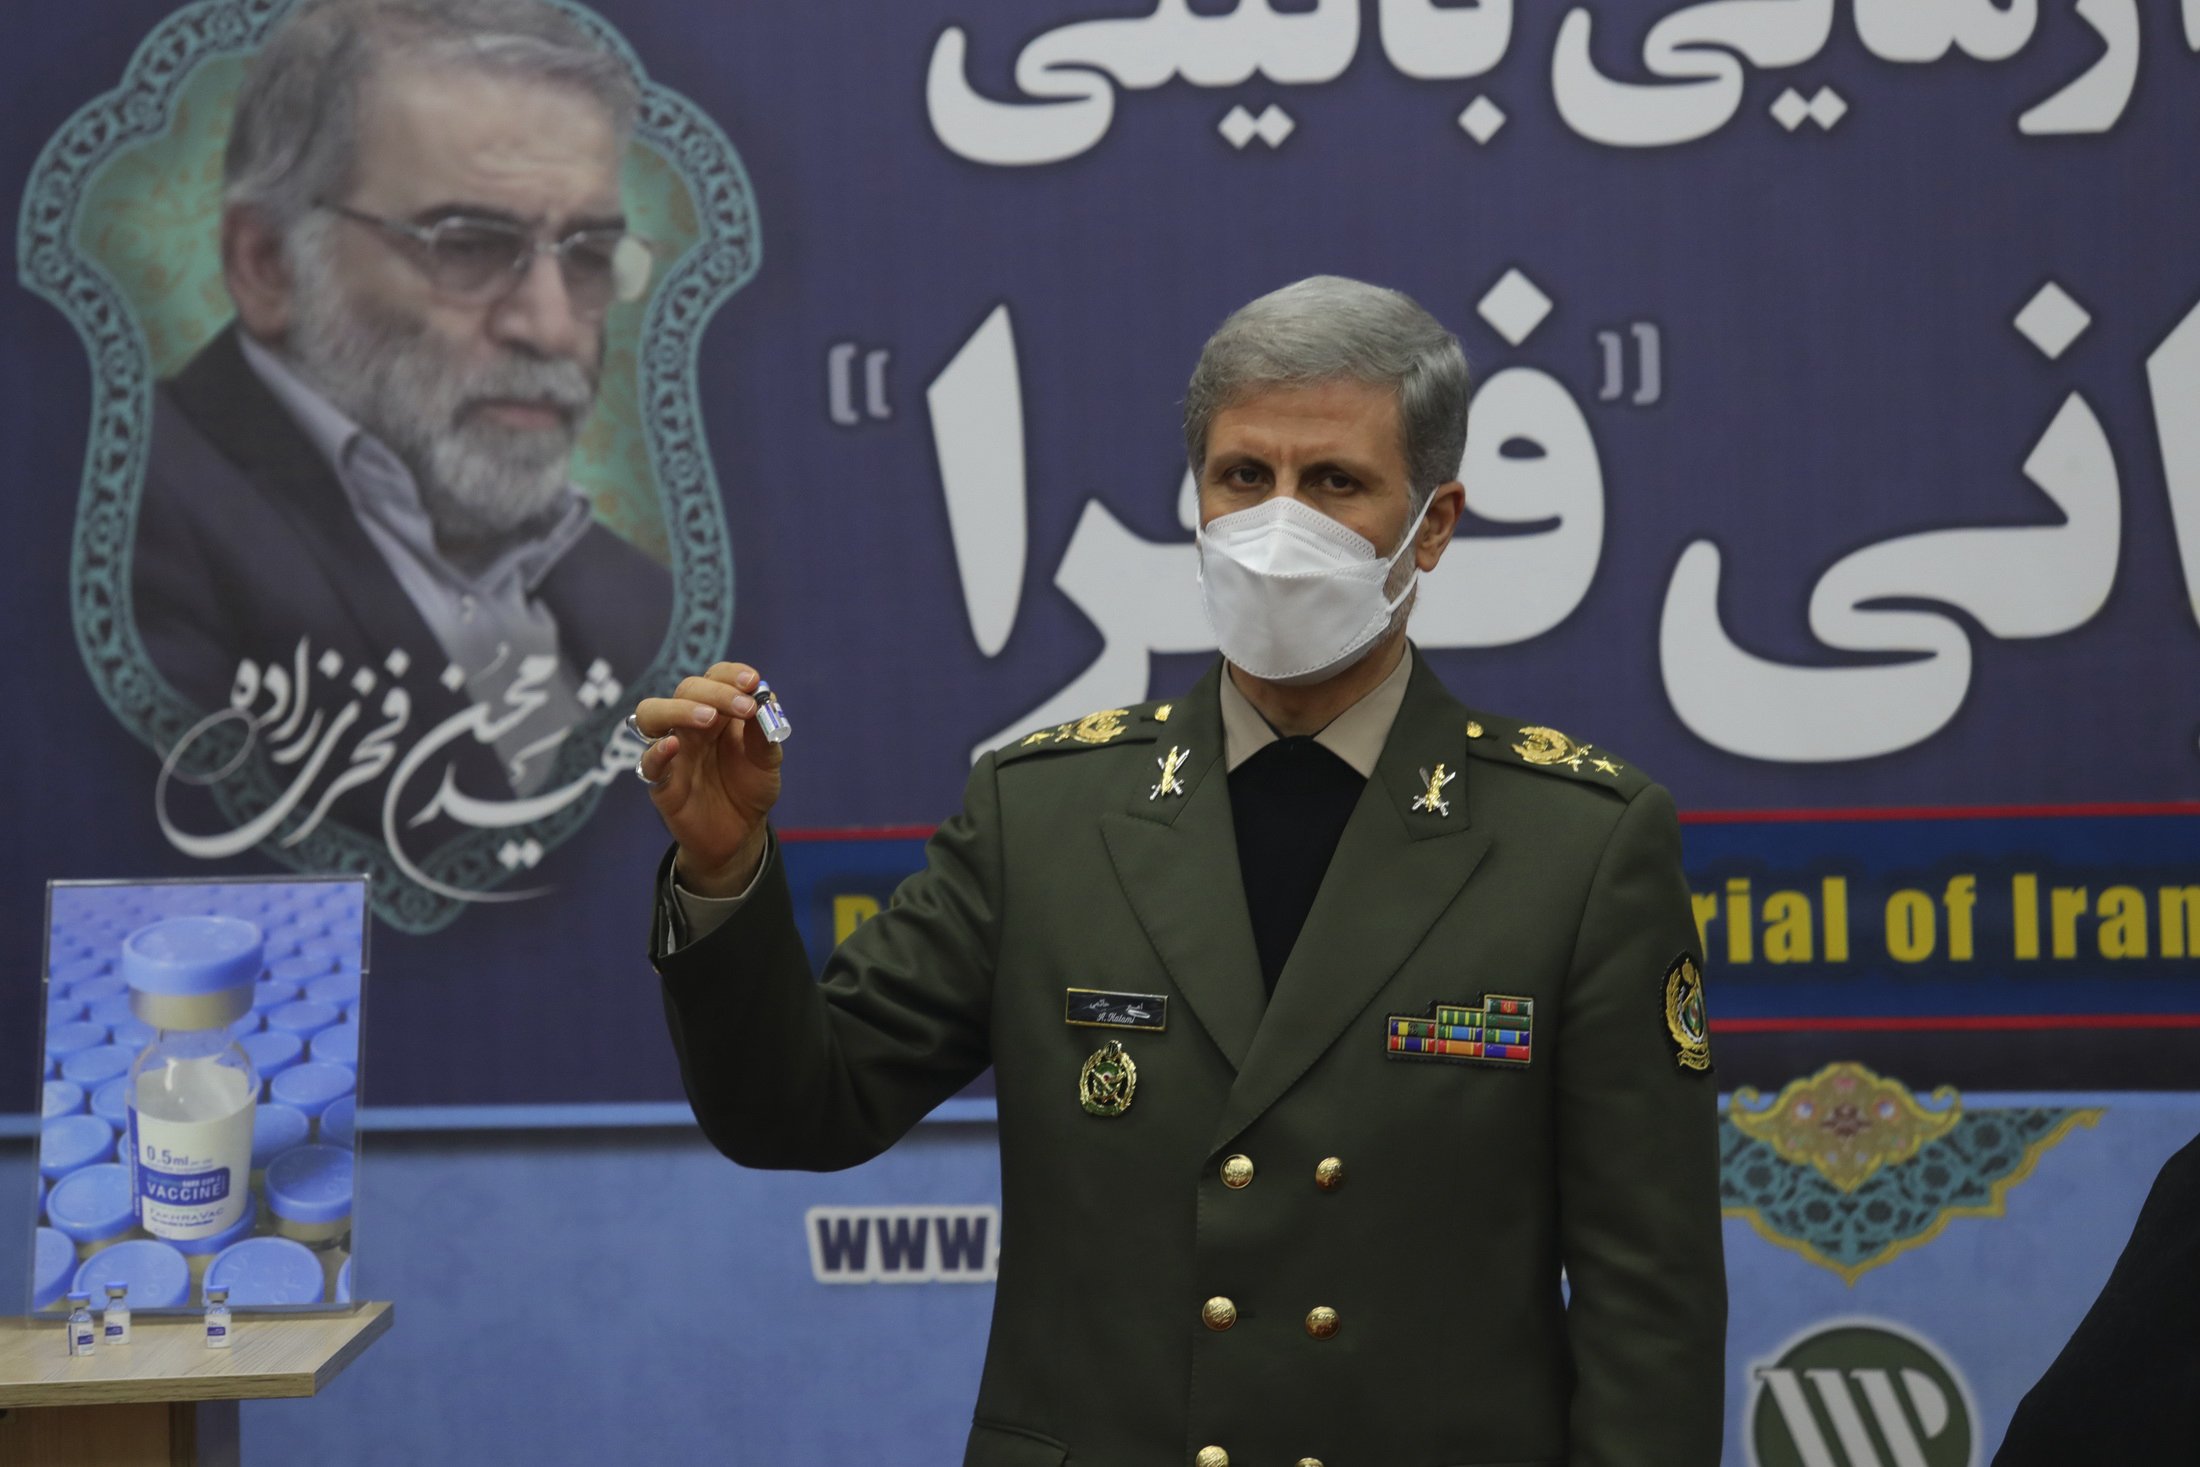 Iran begins trial of new homemade vaccine as campaign slows down